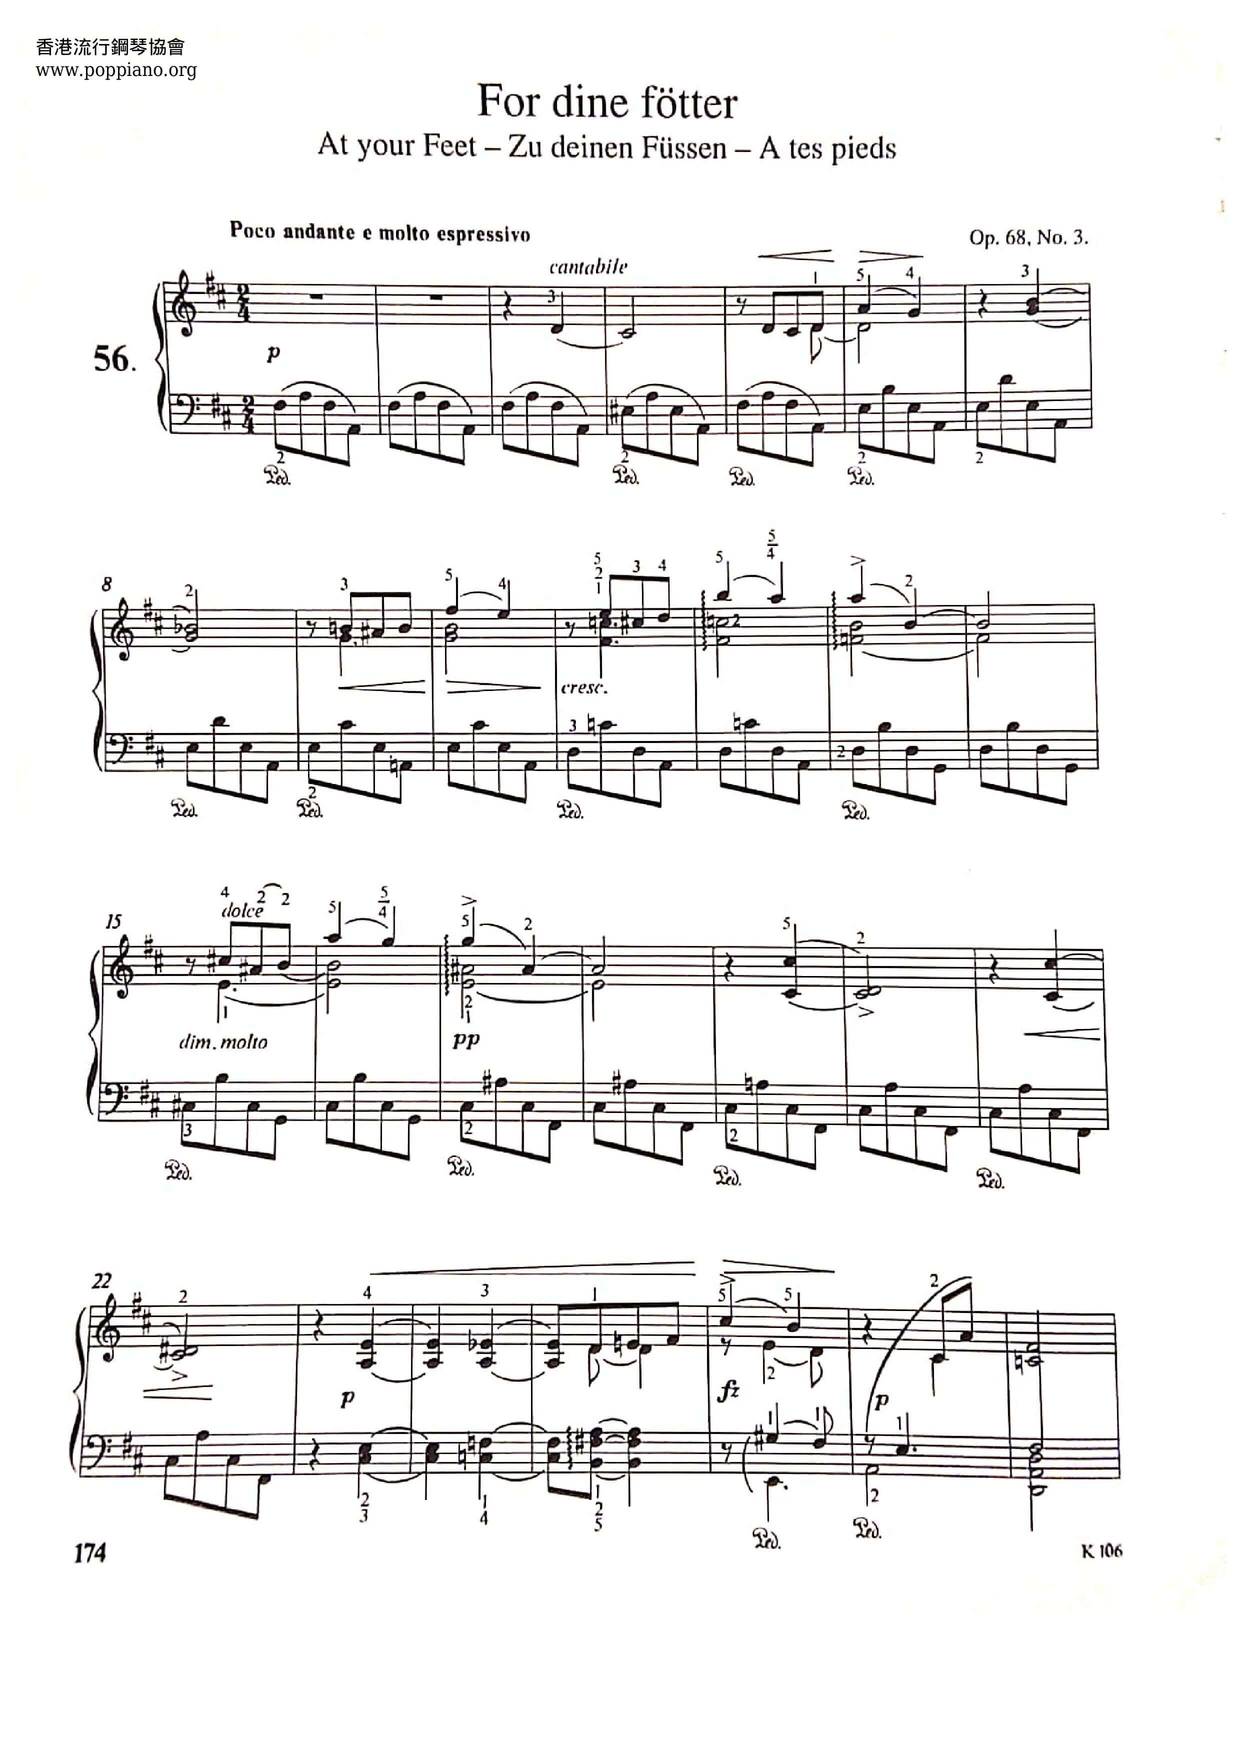 At Your Feet, Op.68 No.3琴谱